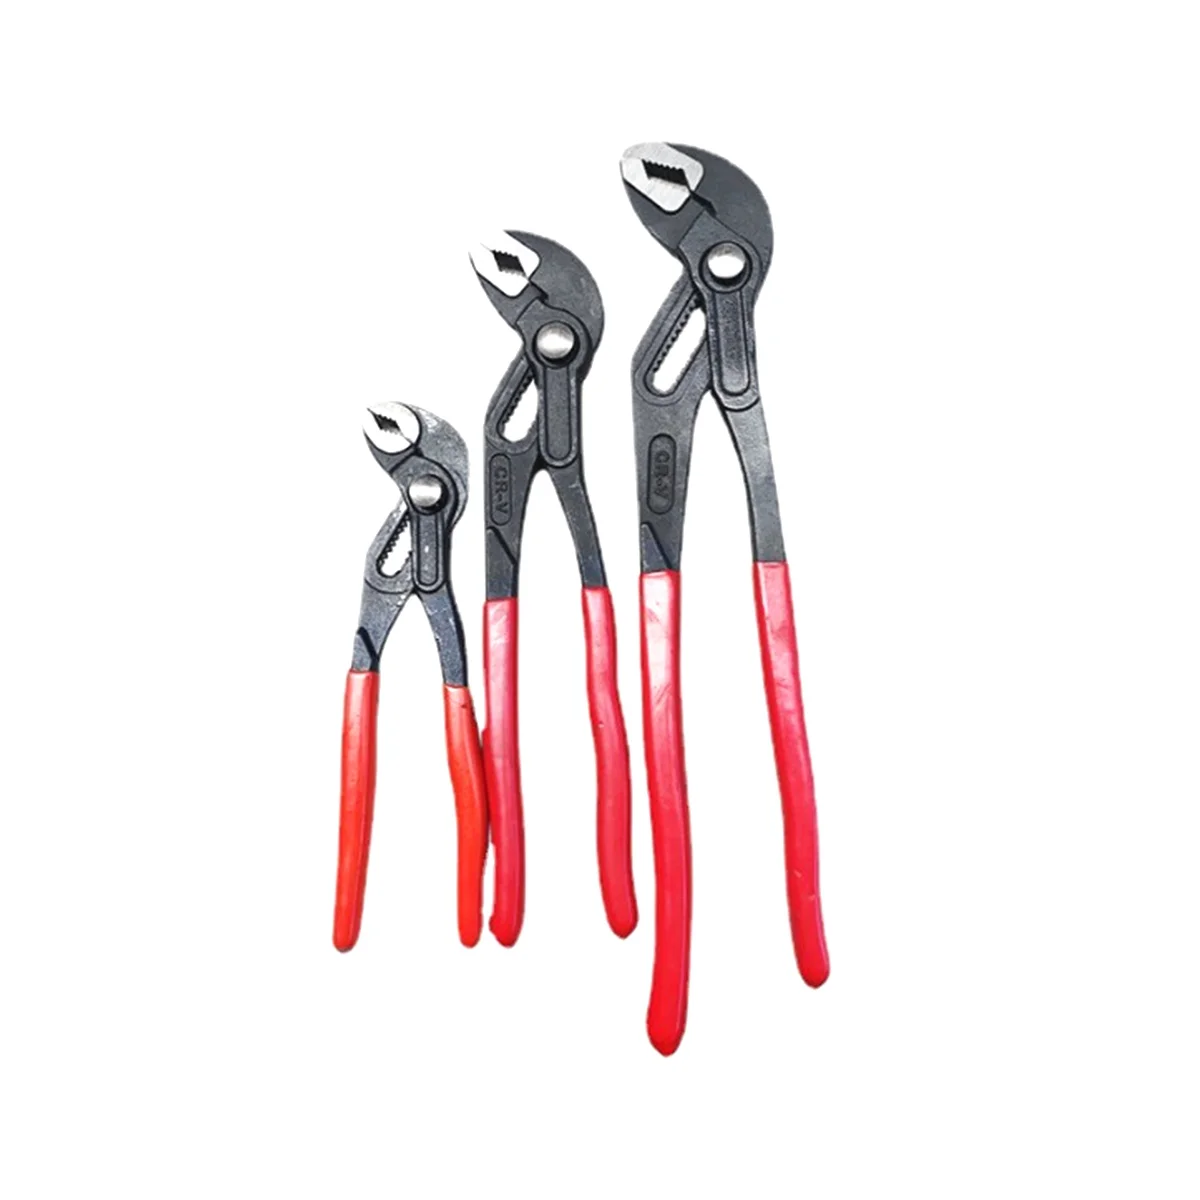 

3-Piece Groove Joint Pliers Set- 7-Inch, 10-Inch, 12-Inch Adjustable Water Pump Pliers, V-Jaw Tongue and Groove Pliers